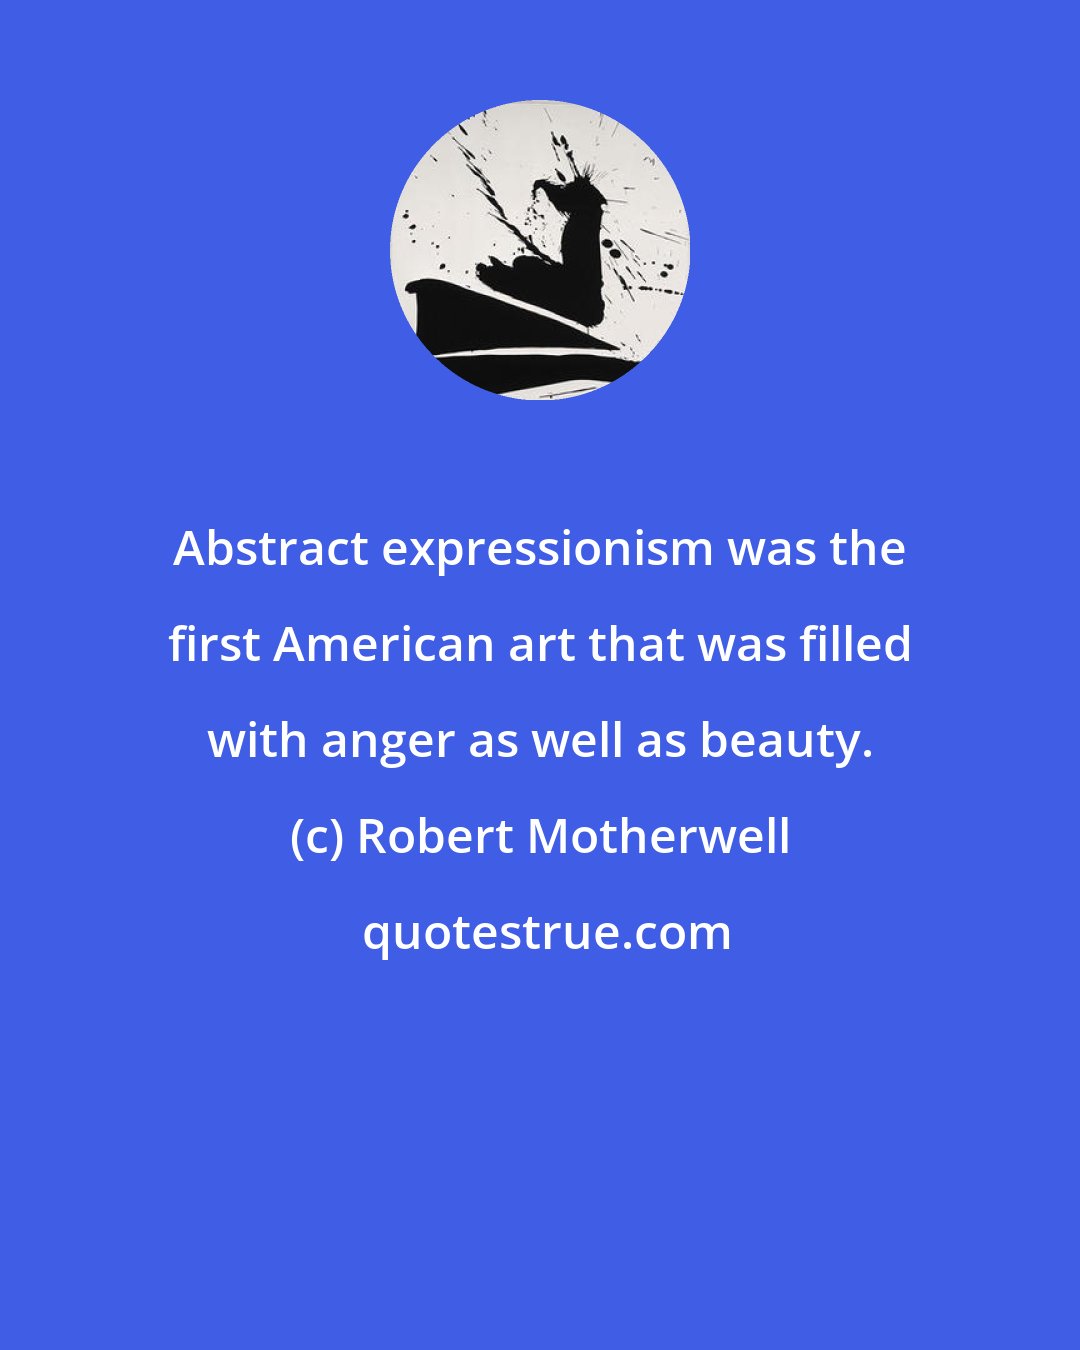 Robert Motherwell: Abstract expressionism was the first American art that was filled with anger as well as beauty.